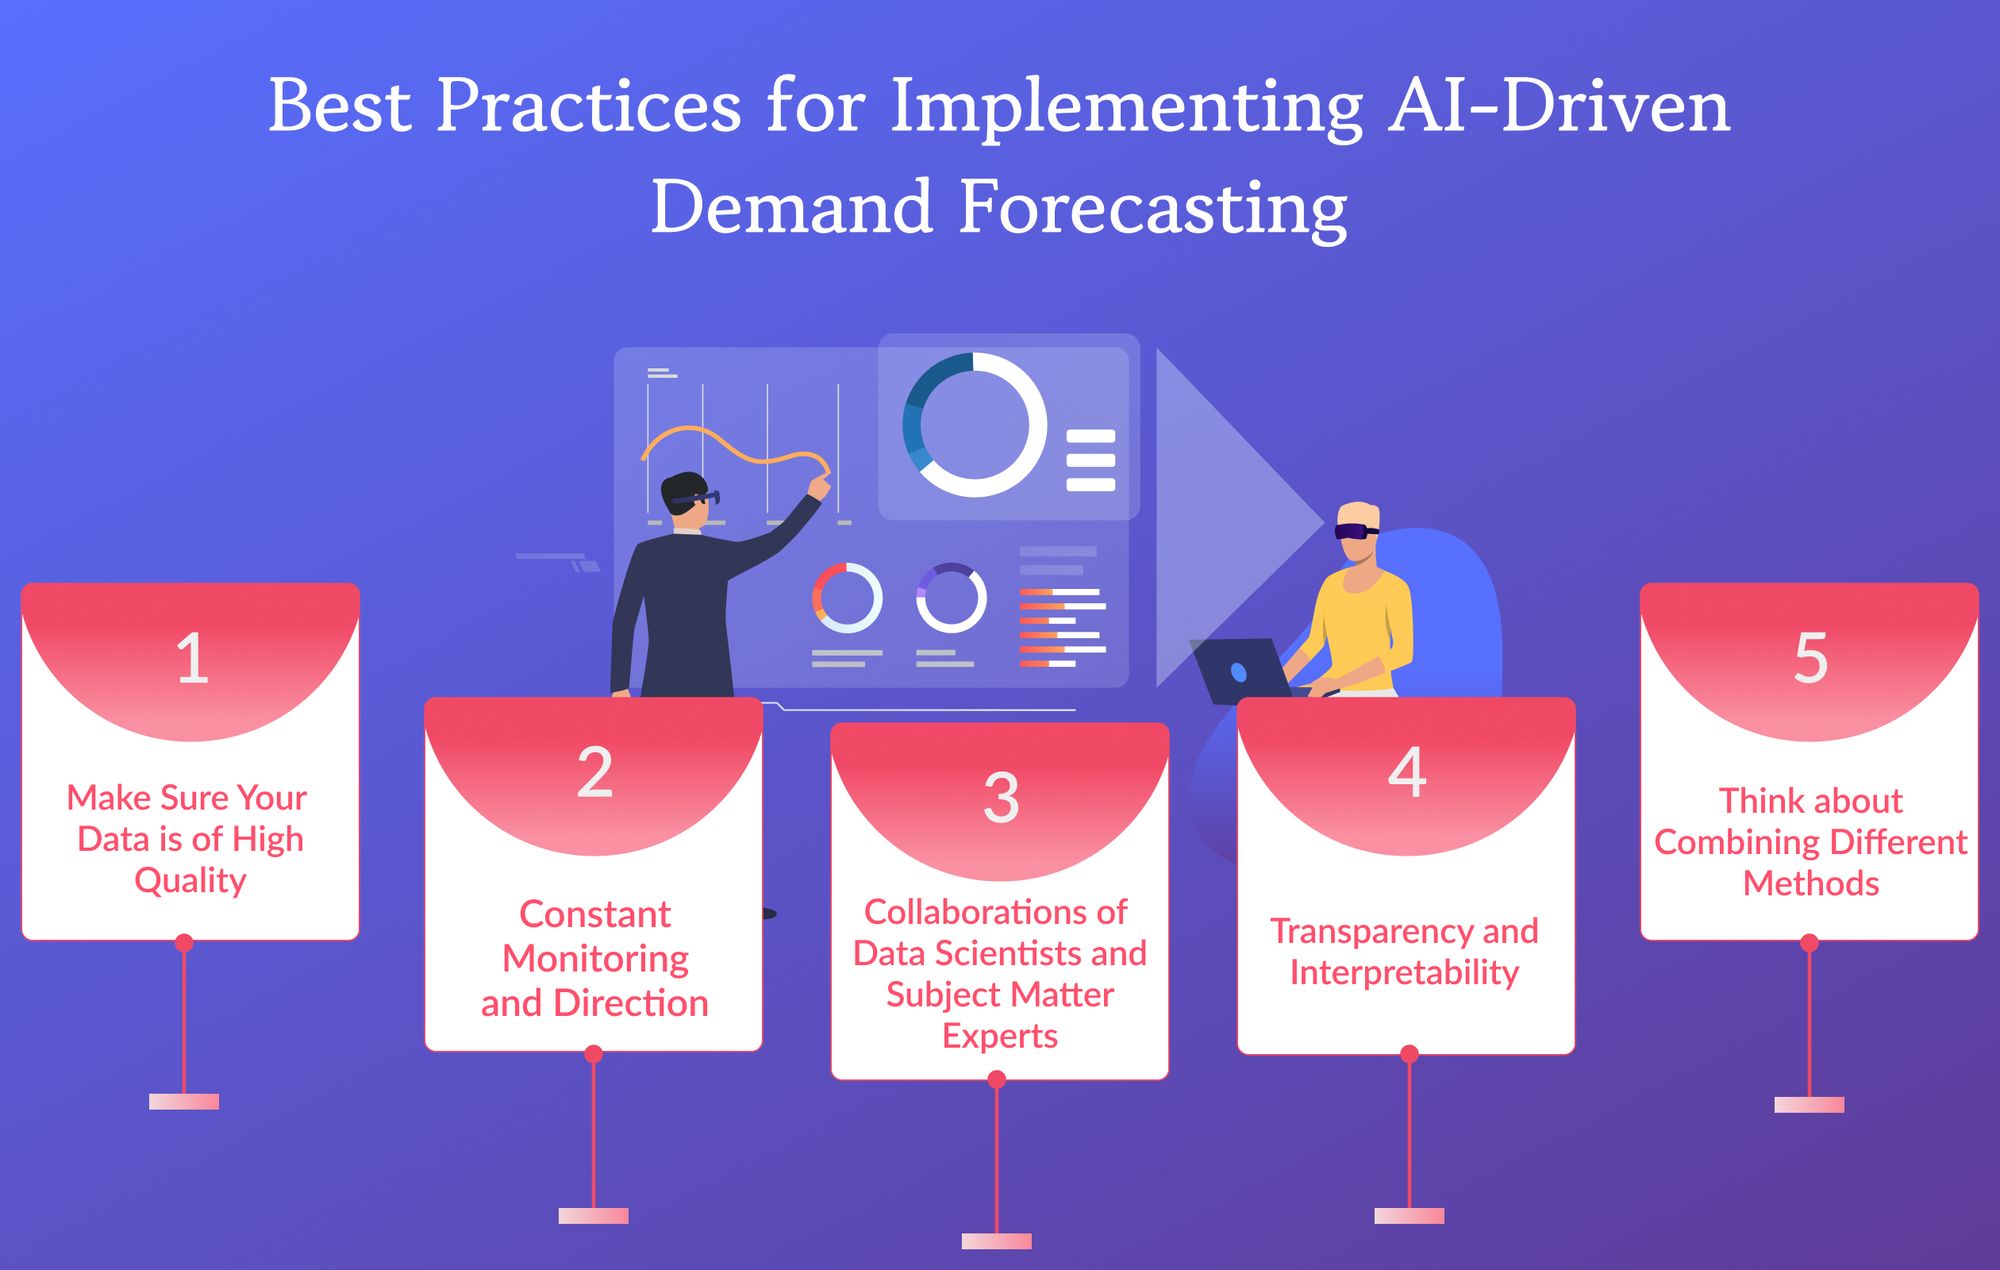 Best Practices for Implementing AI-Driven Demand Forecasting